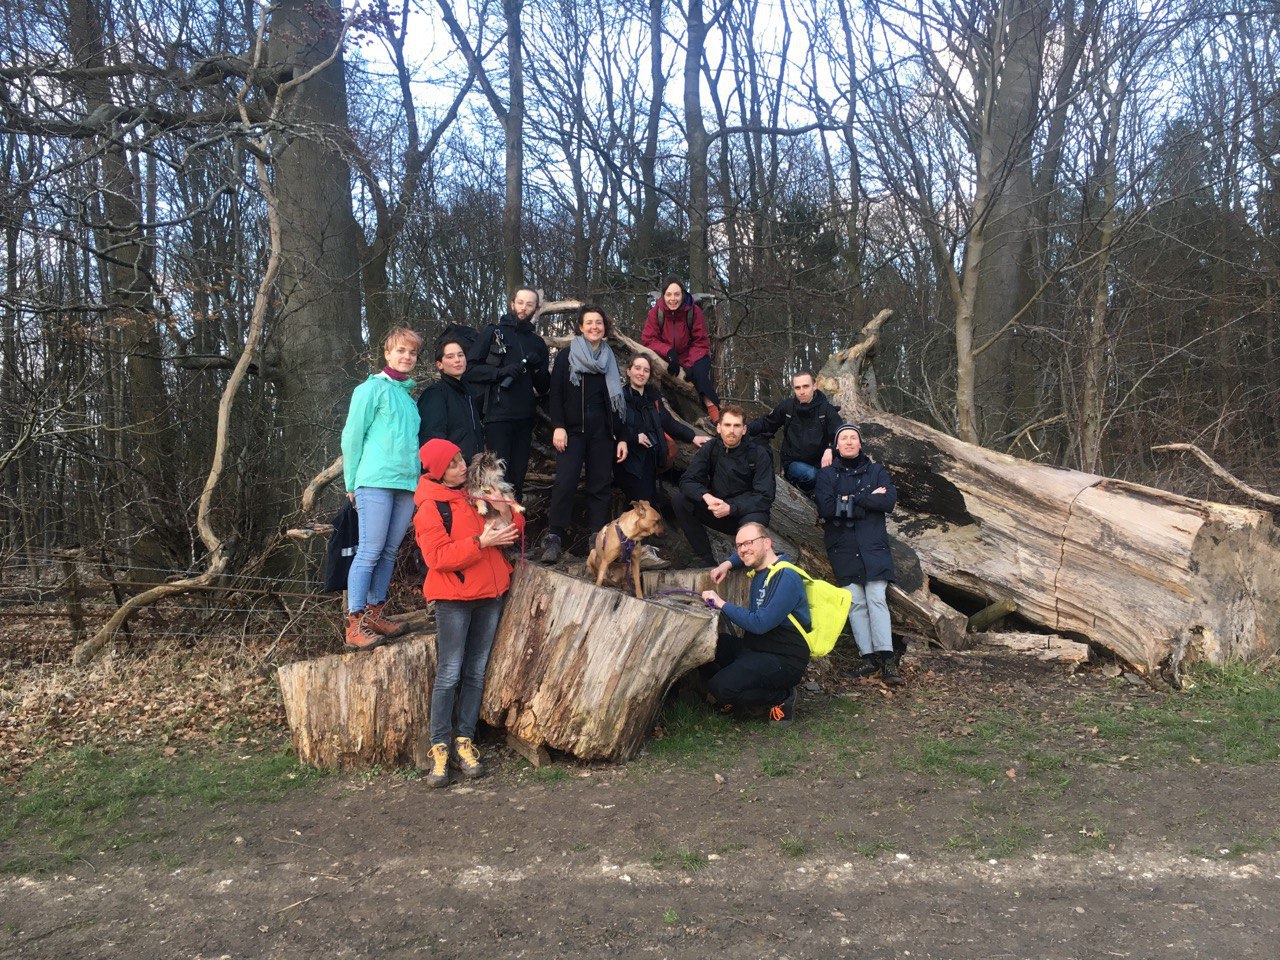 A group of people wearing winter clothes, standing on fallen tree stumps